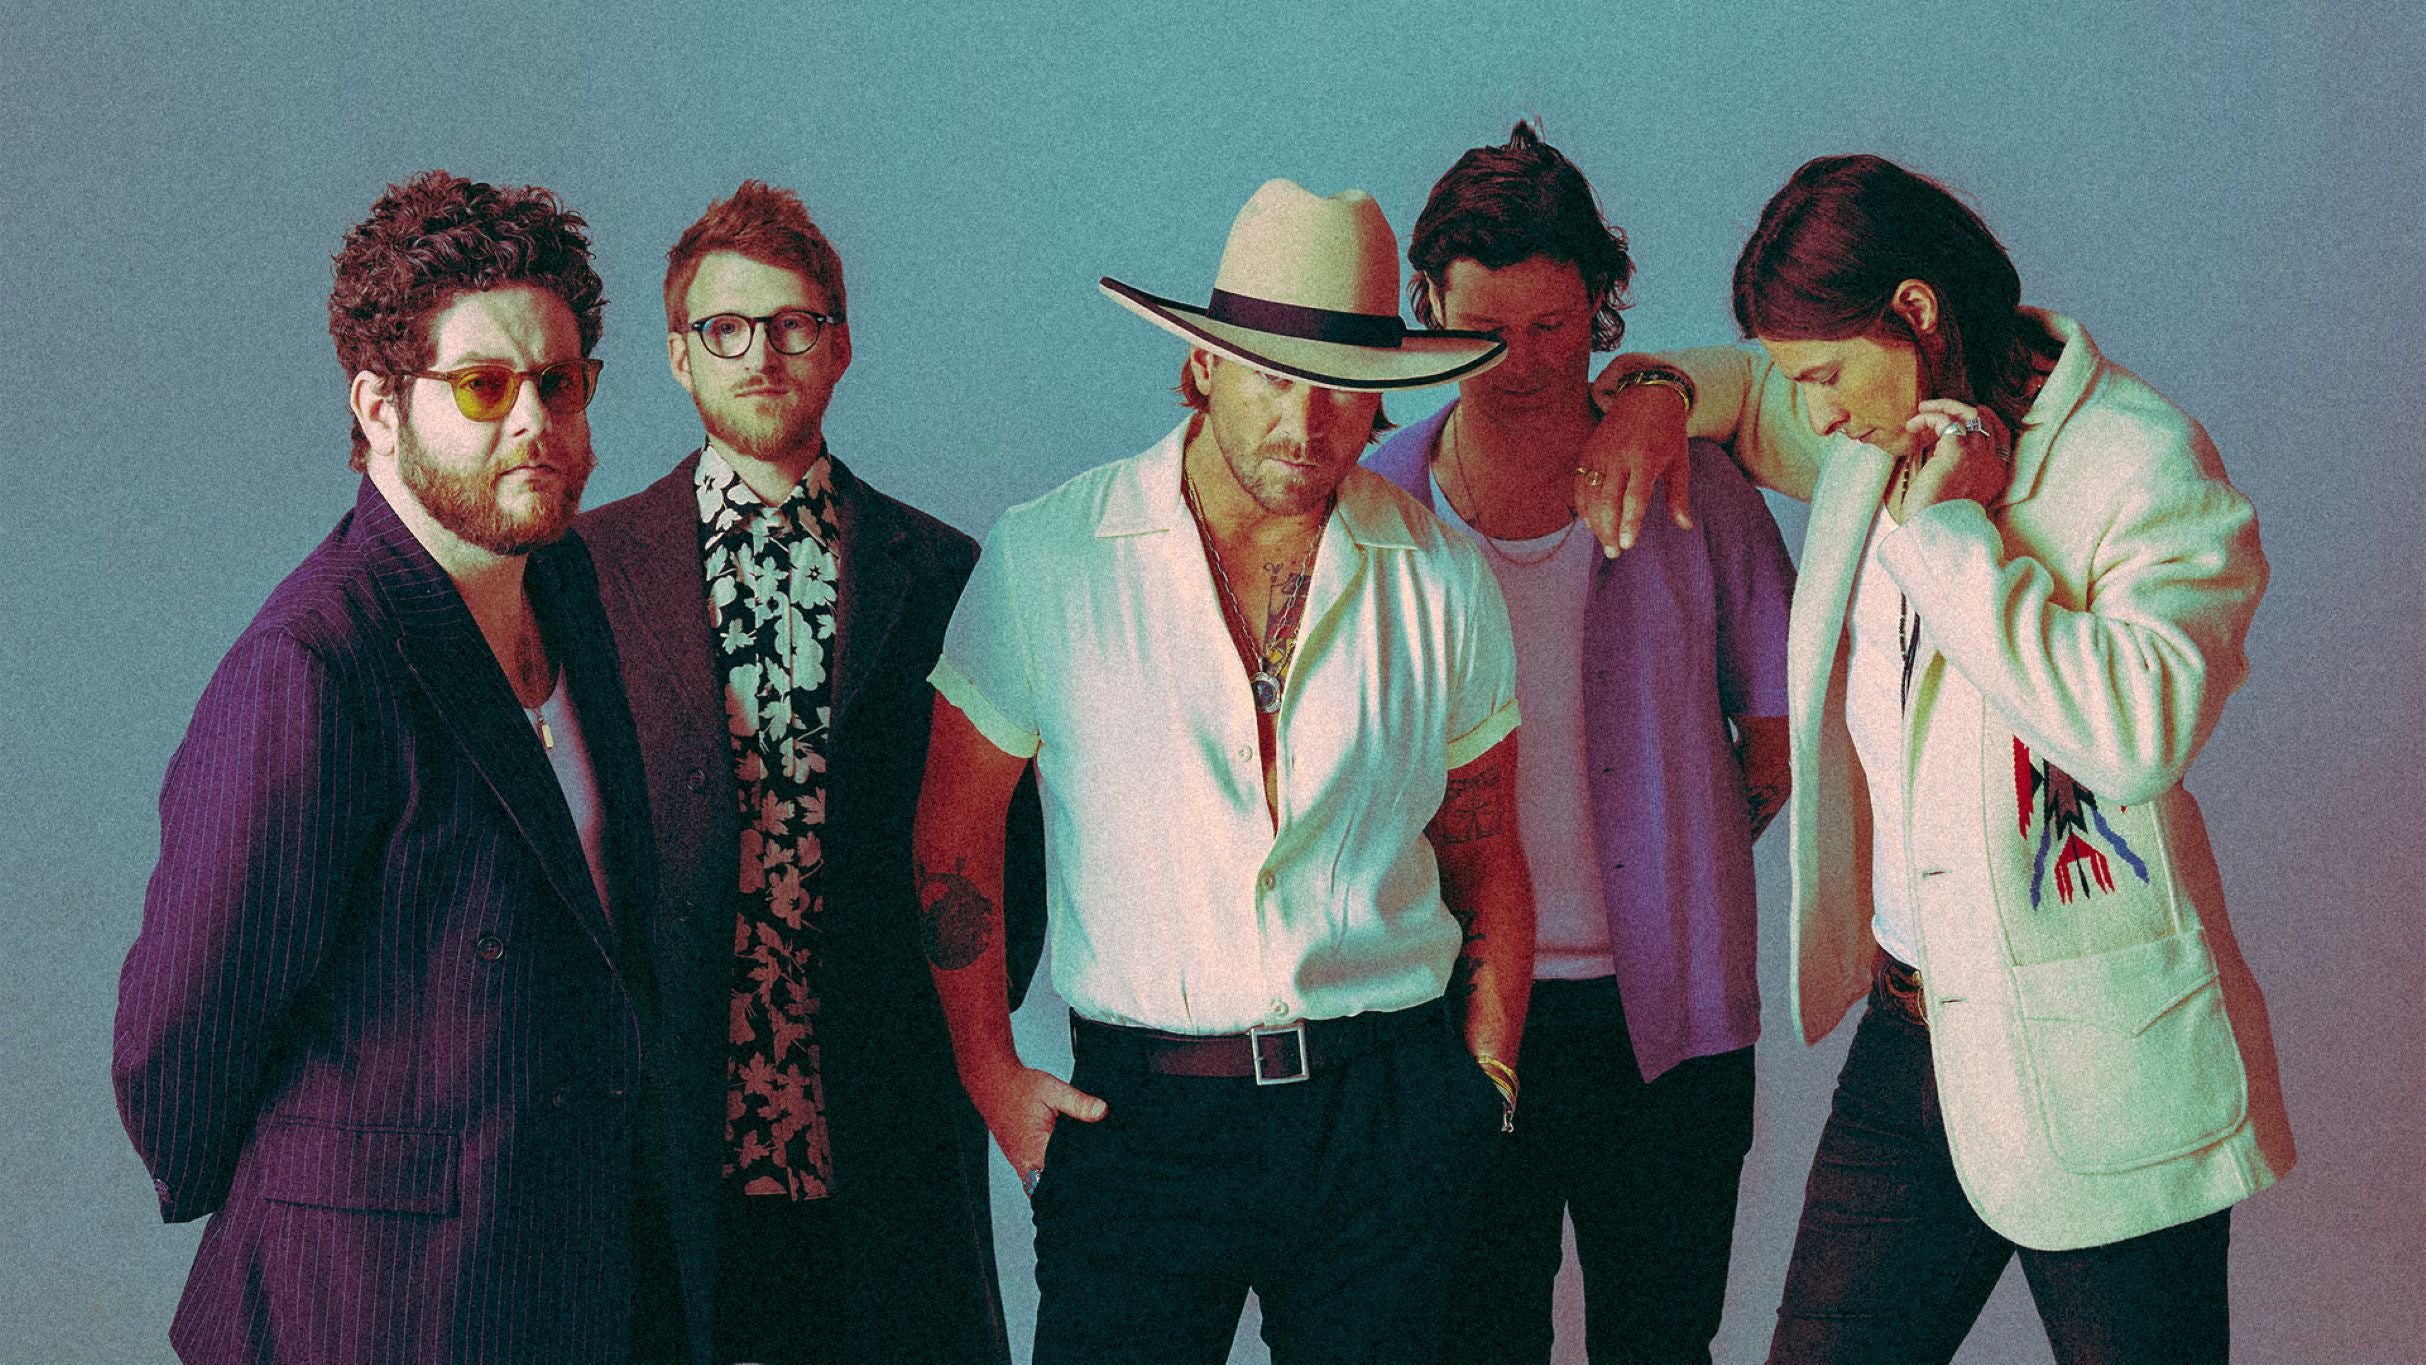 NEEDTOBREATHE pre-sale password for approved tickets in Tampa